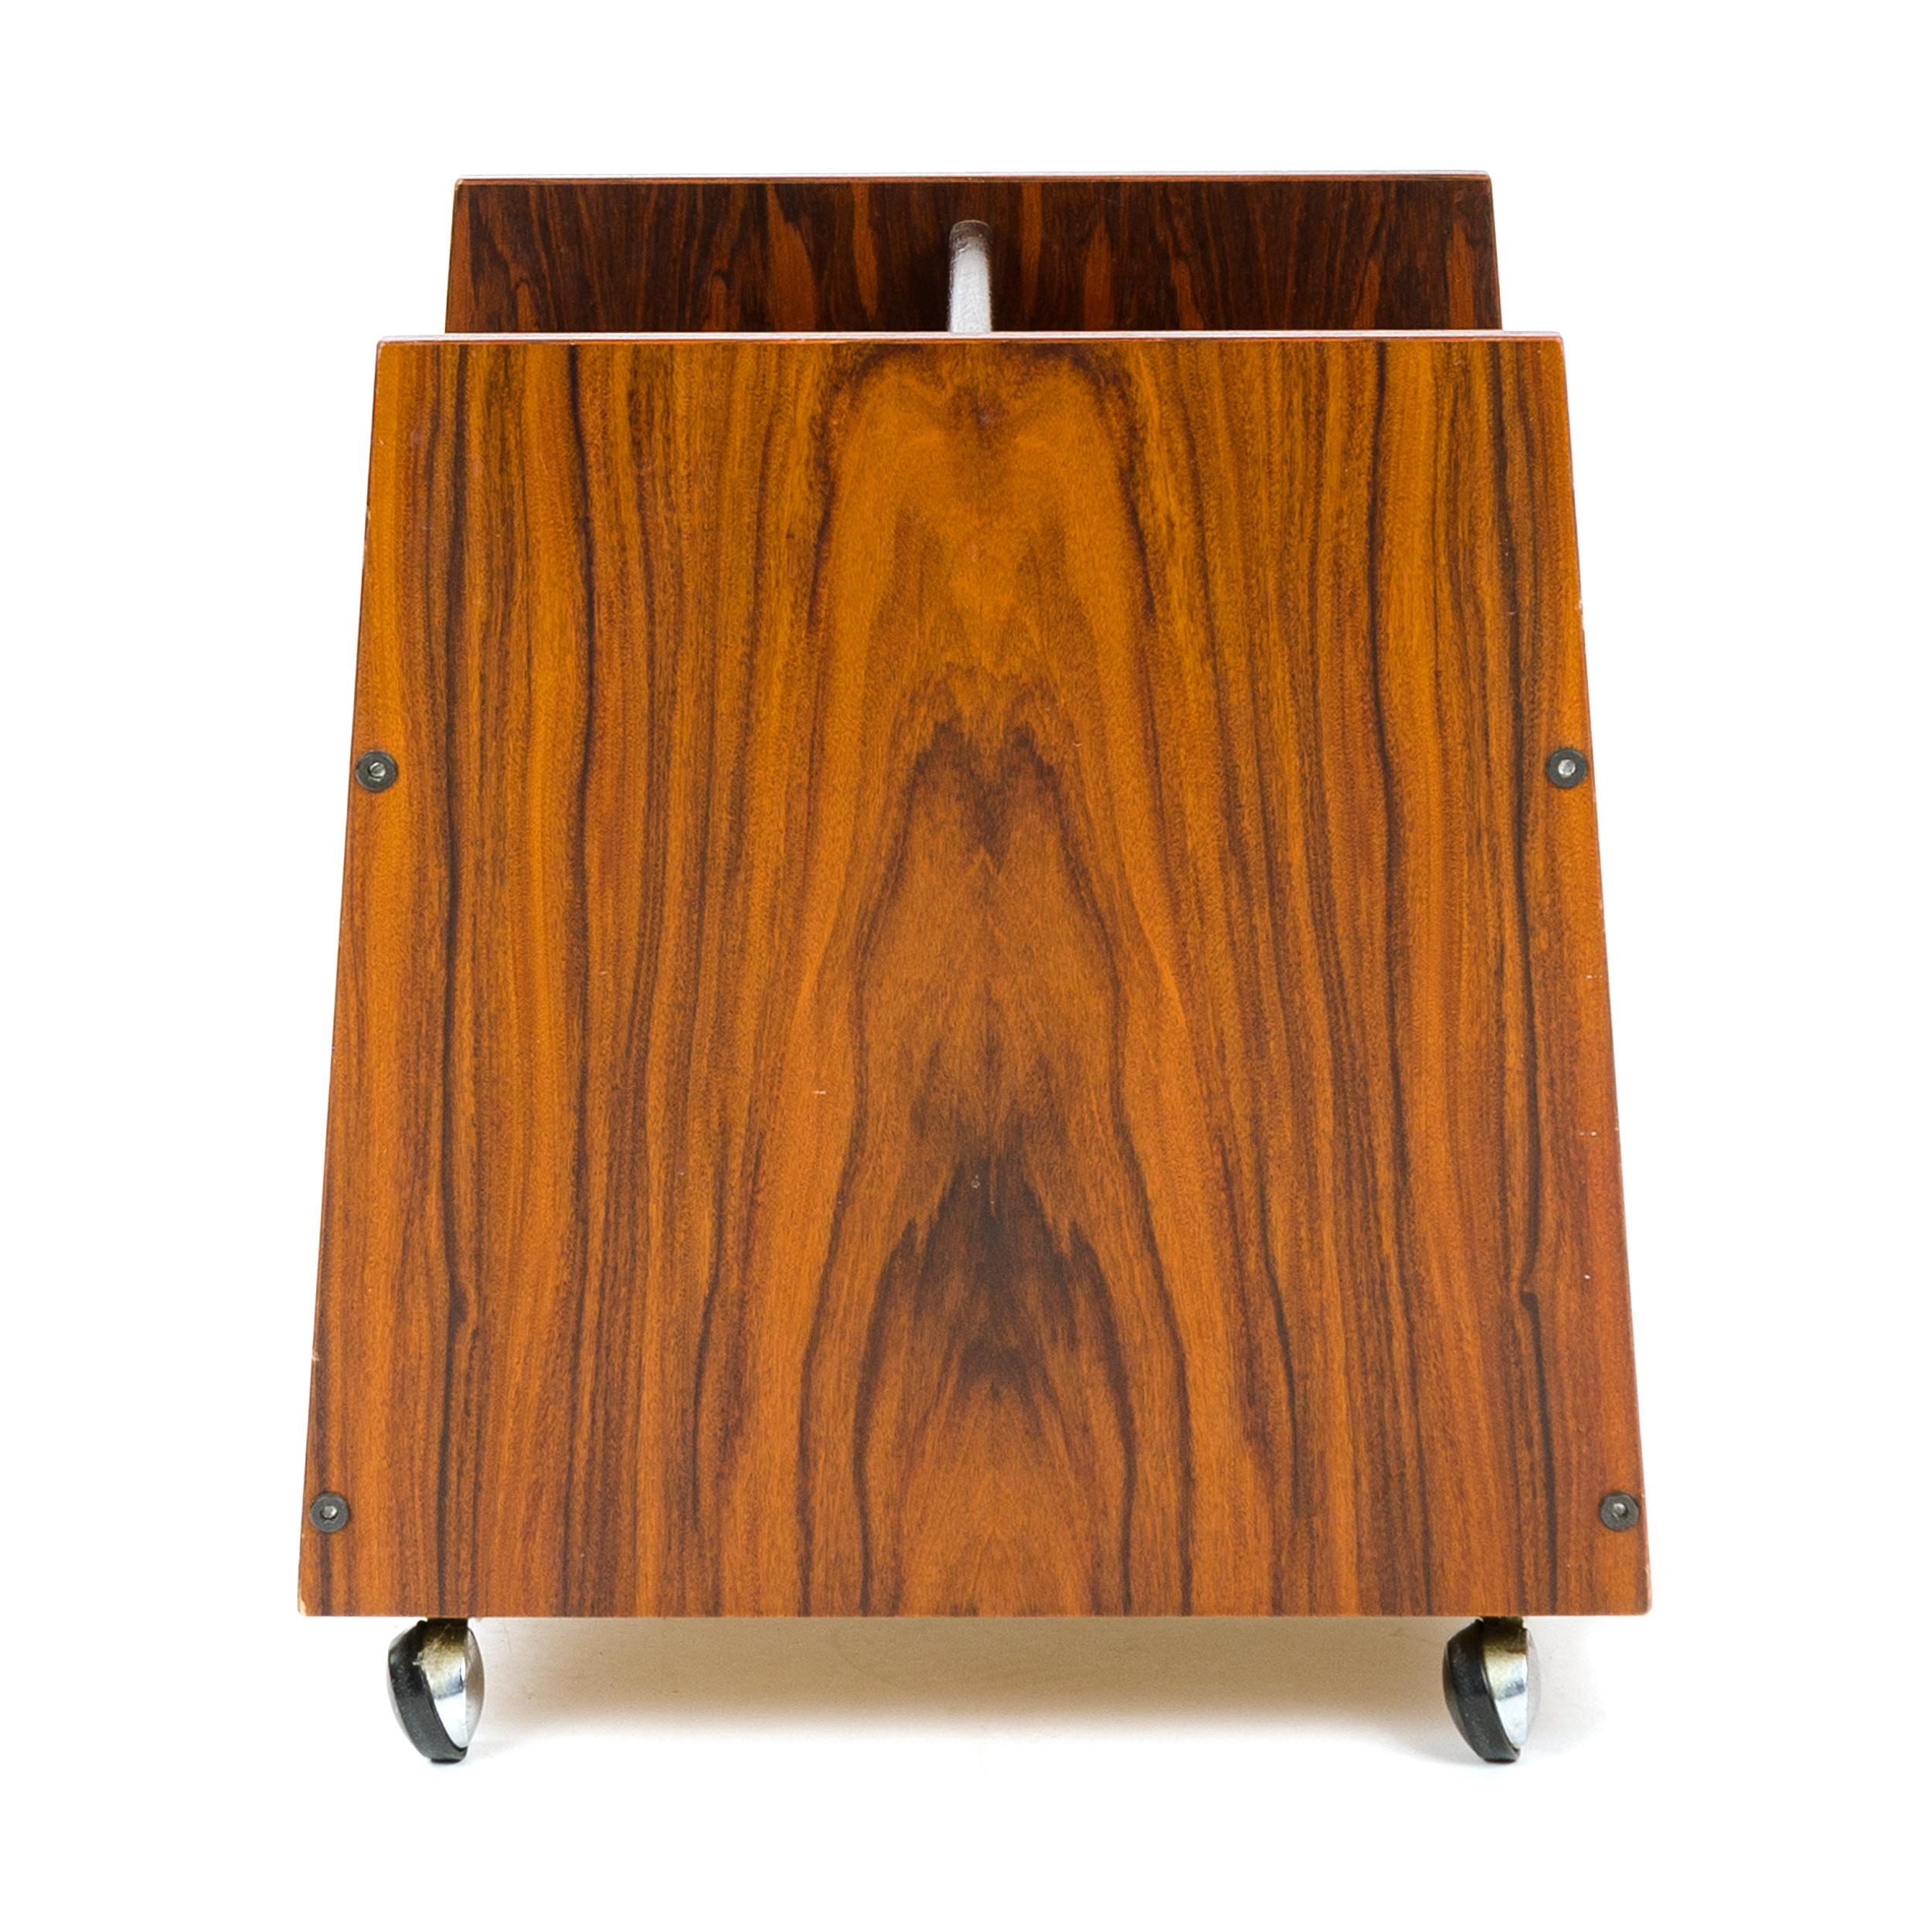 A rolling rosewood magazine caddy on four swivel casters with three divided compartments and a handle for ease of movement.